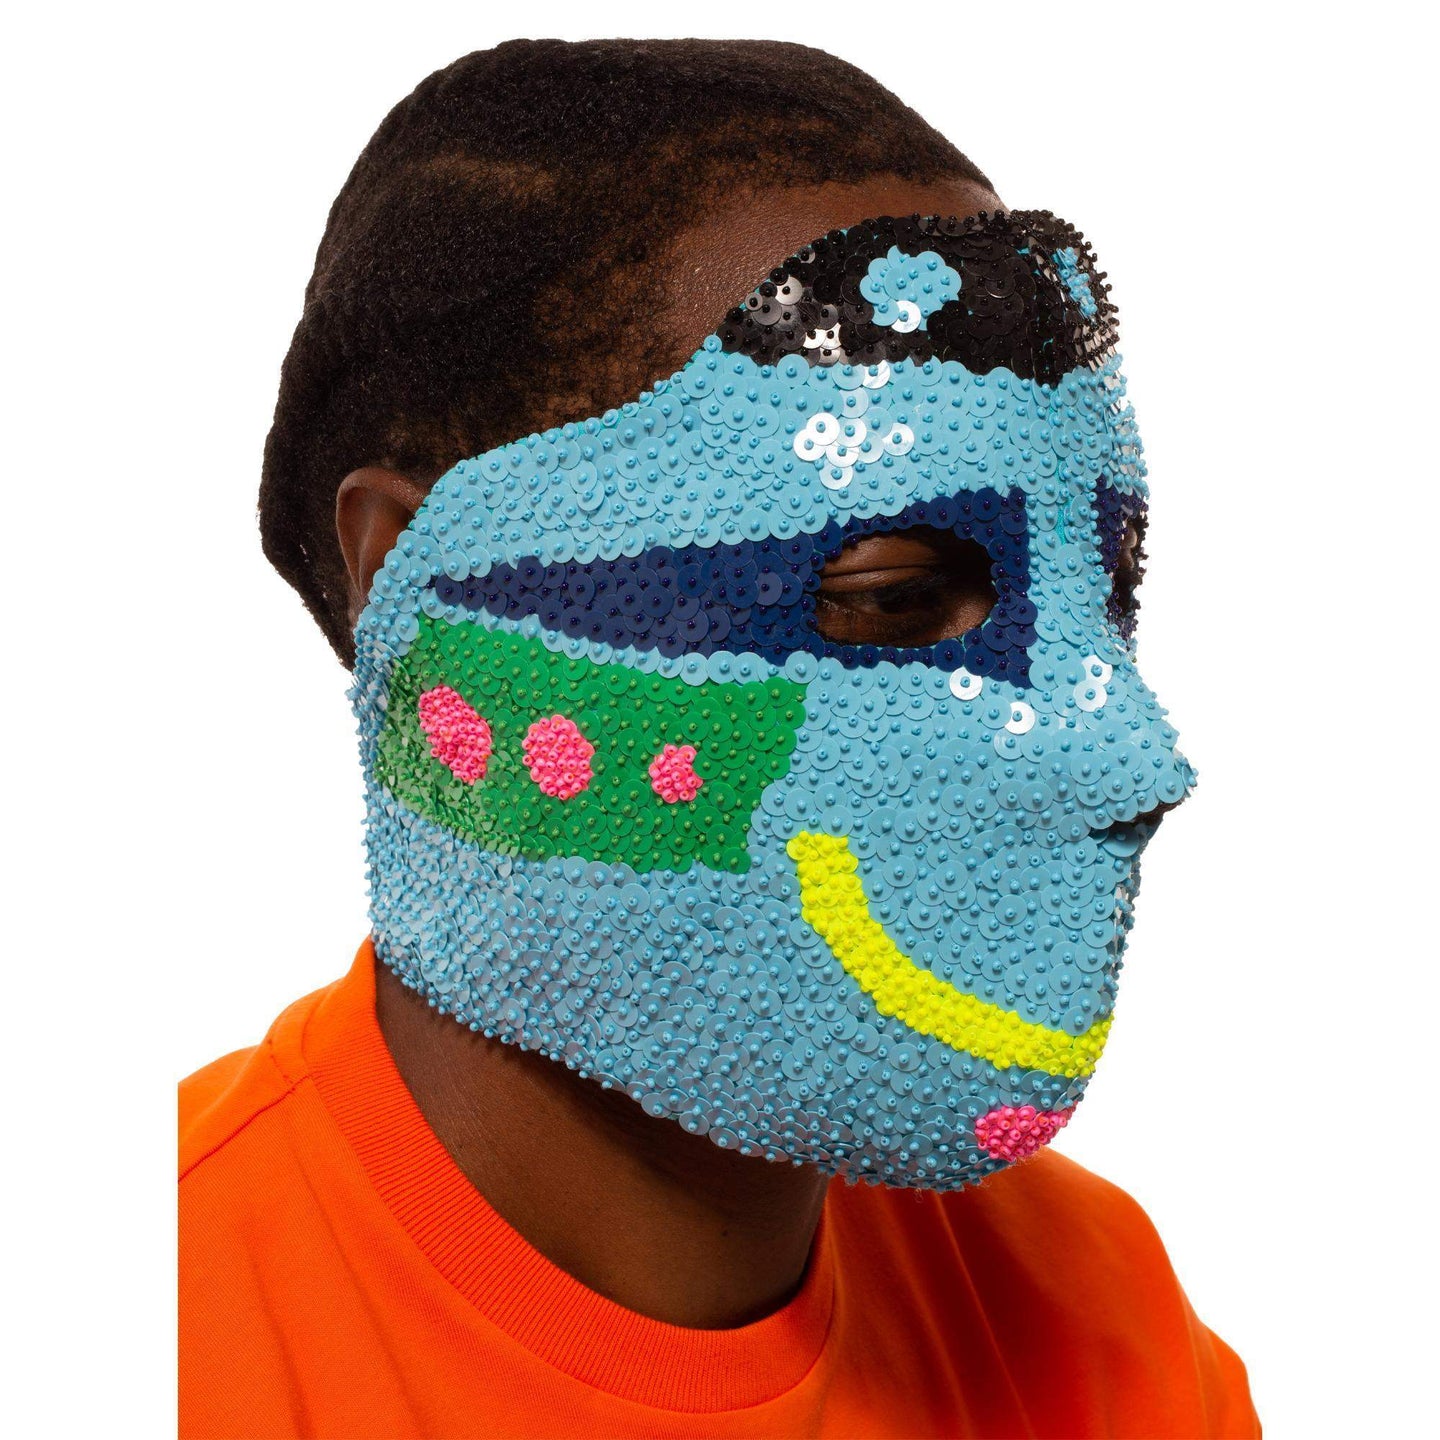 Smile Mask – Congruent Space *₊˚⁎*₊